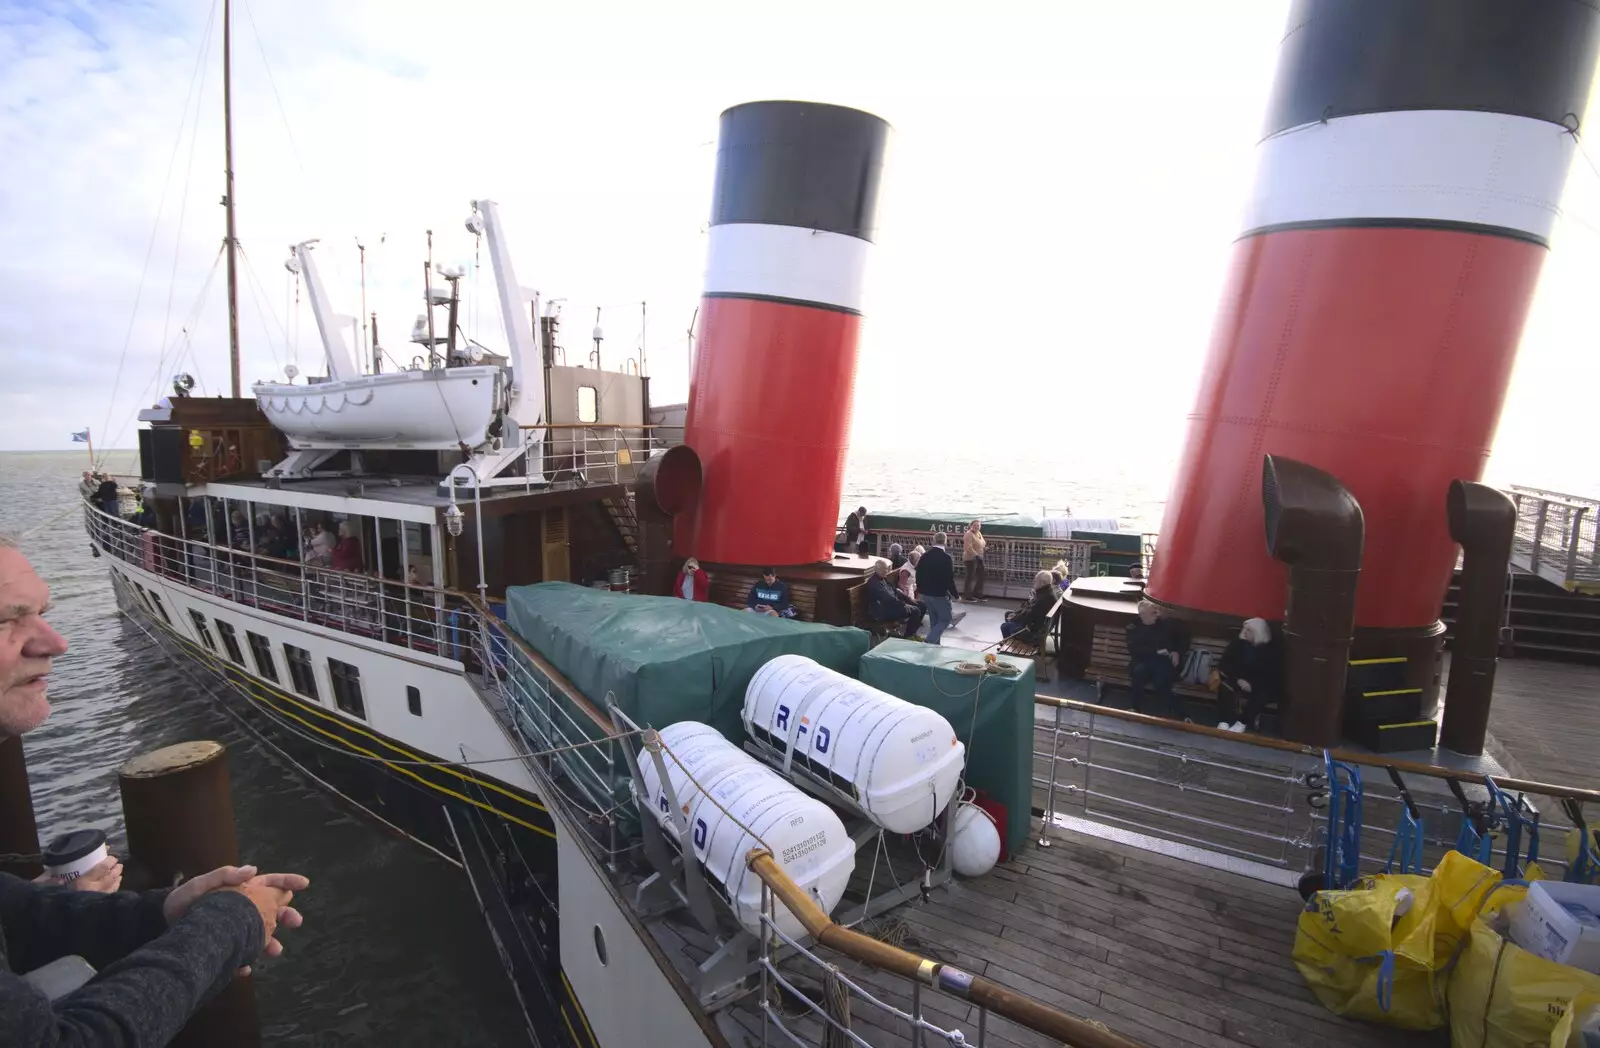 A view of the Waverley, from The Waverley Paddle Steamer at Southwold Pier, Suffolk - 27th September 2023